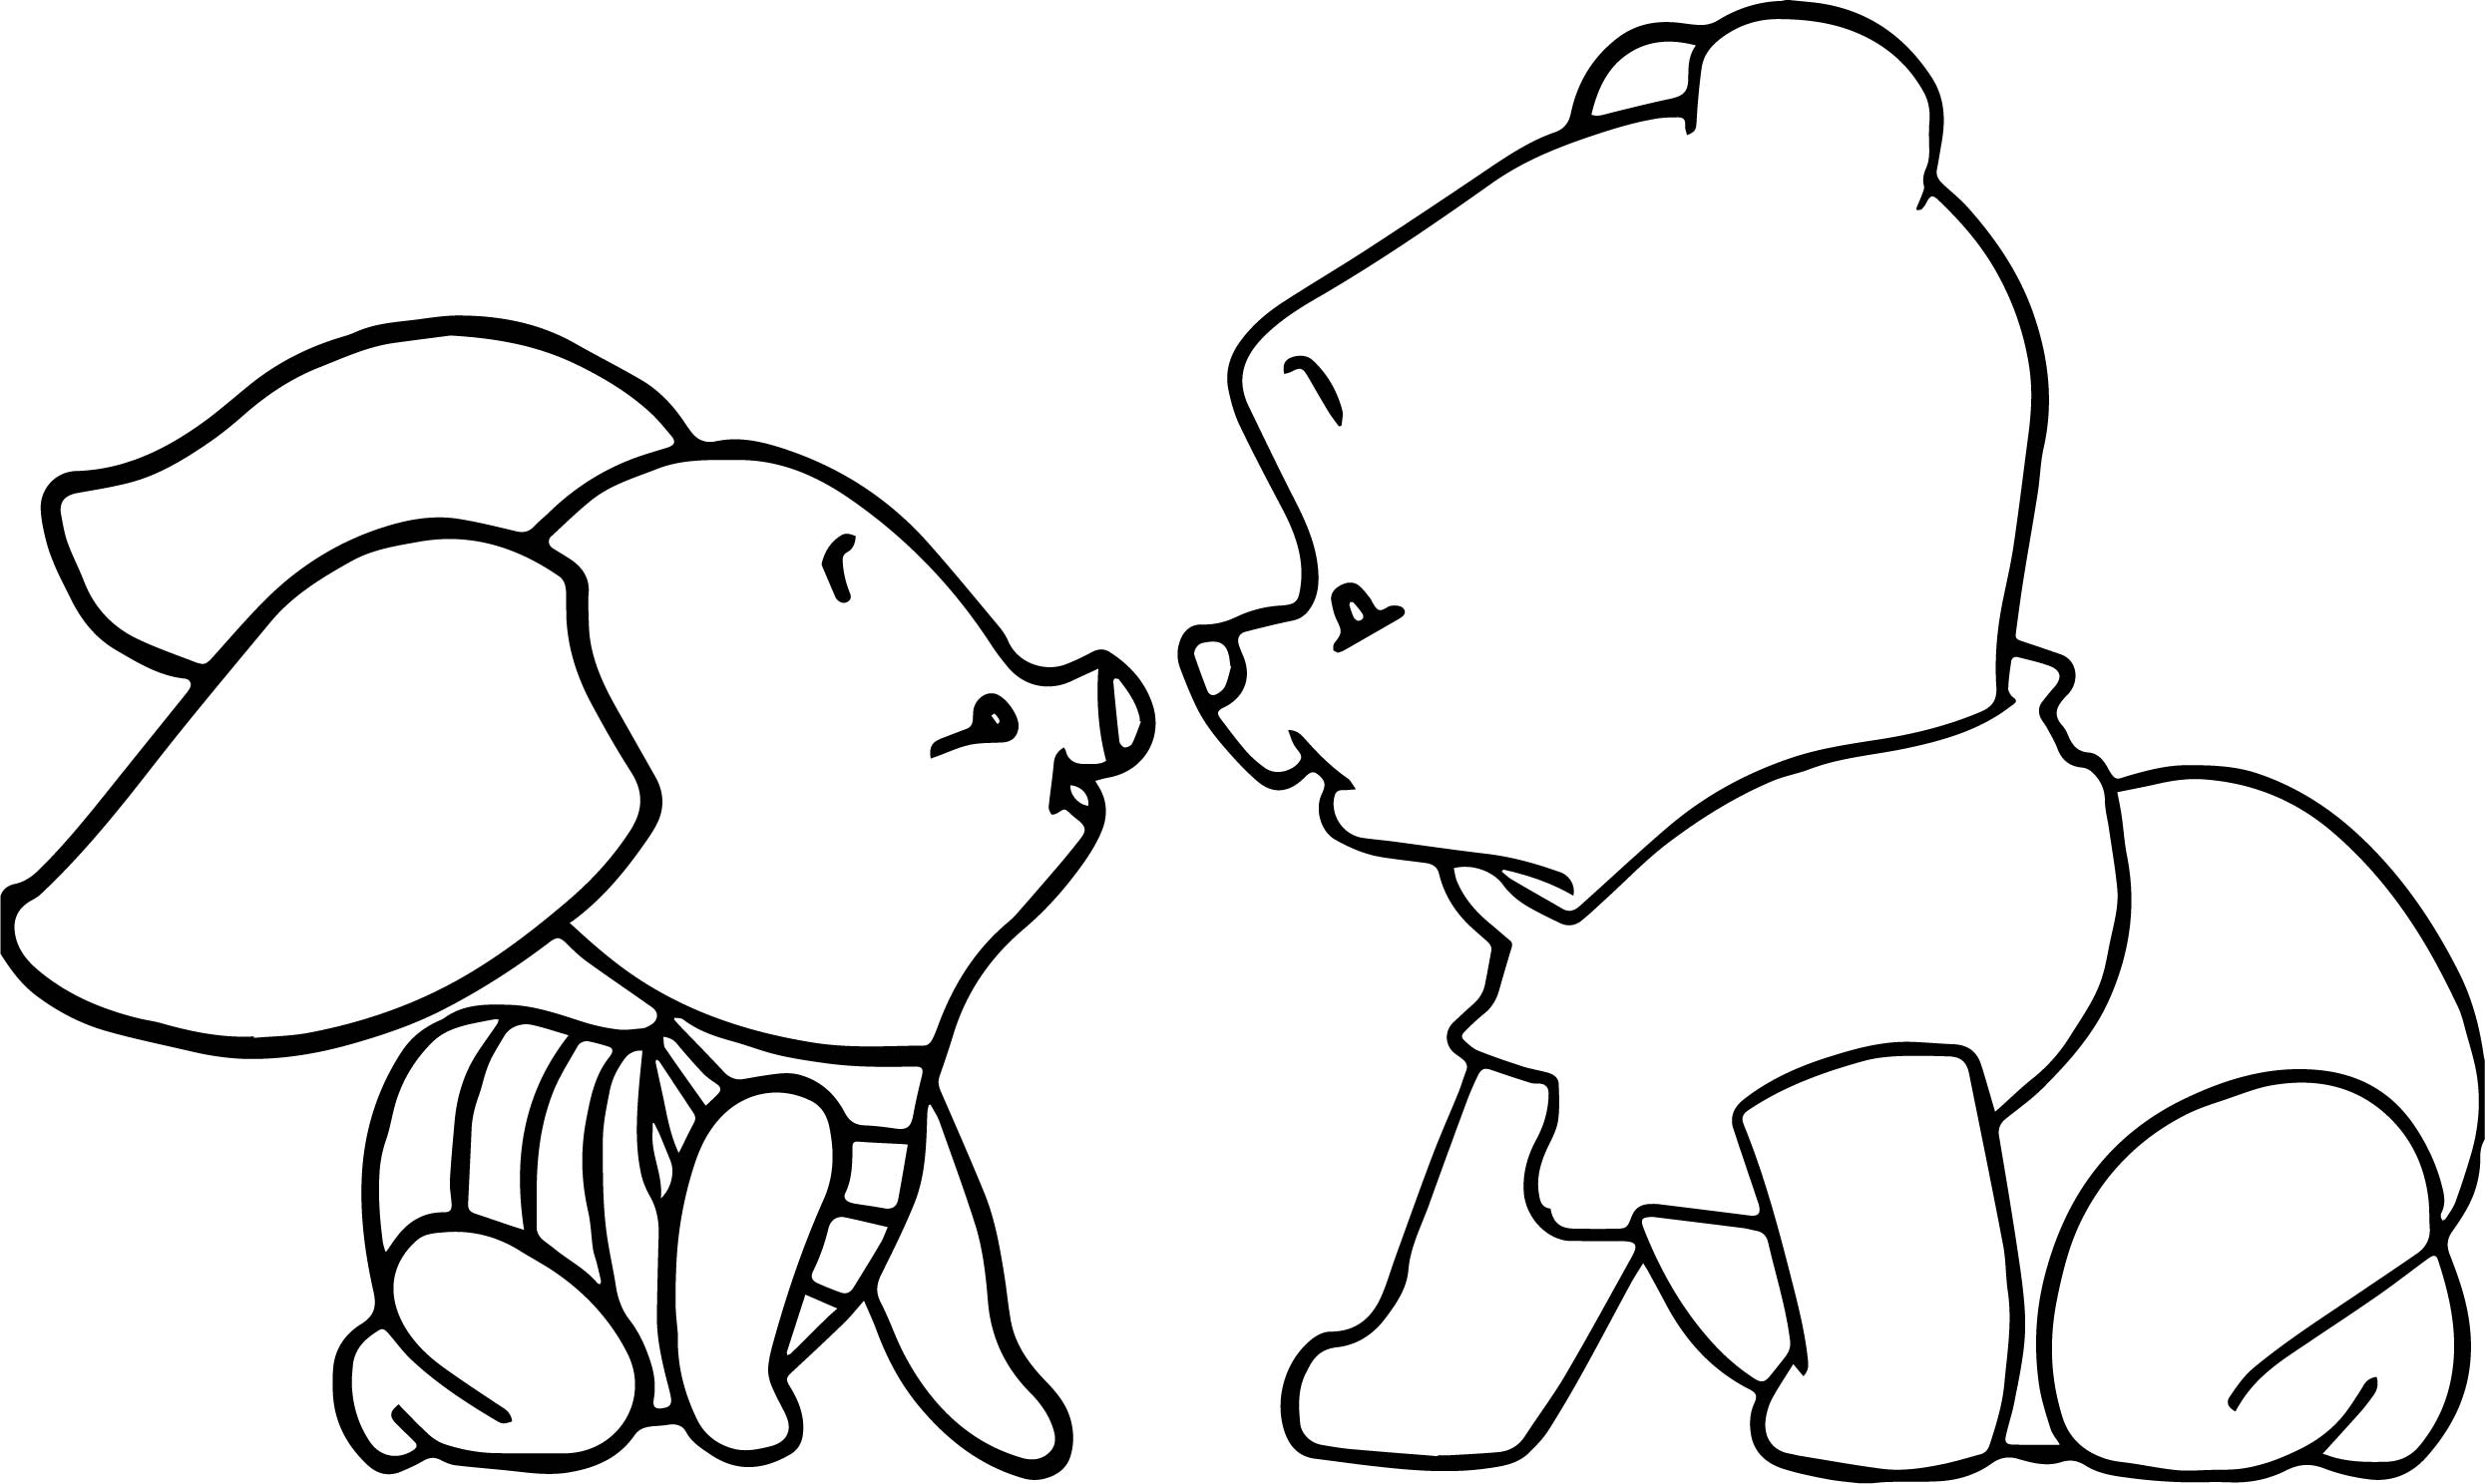 Winnie The Pooh And Piglet Coloring Pages At Getcolorings Com Free